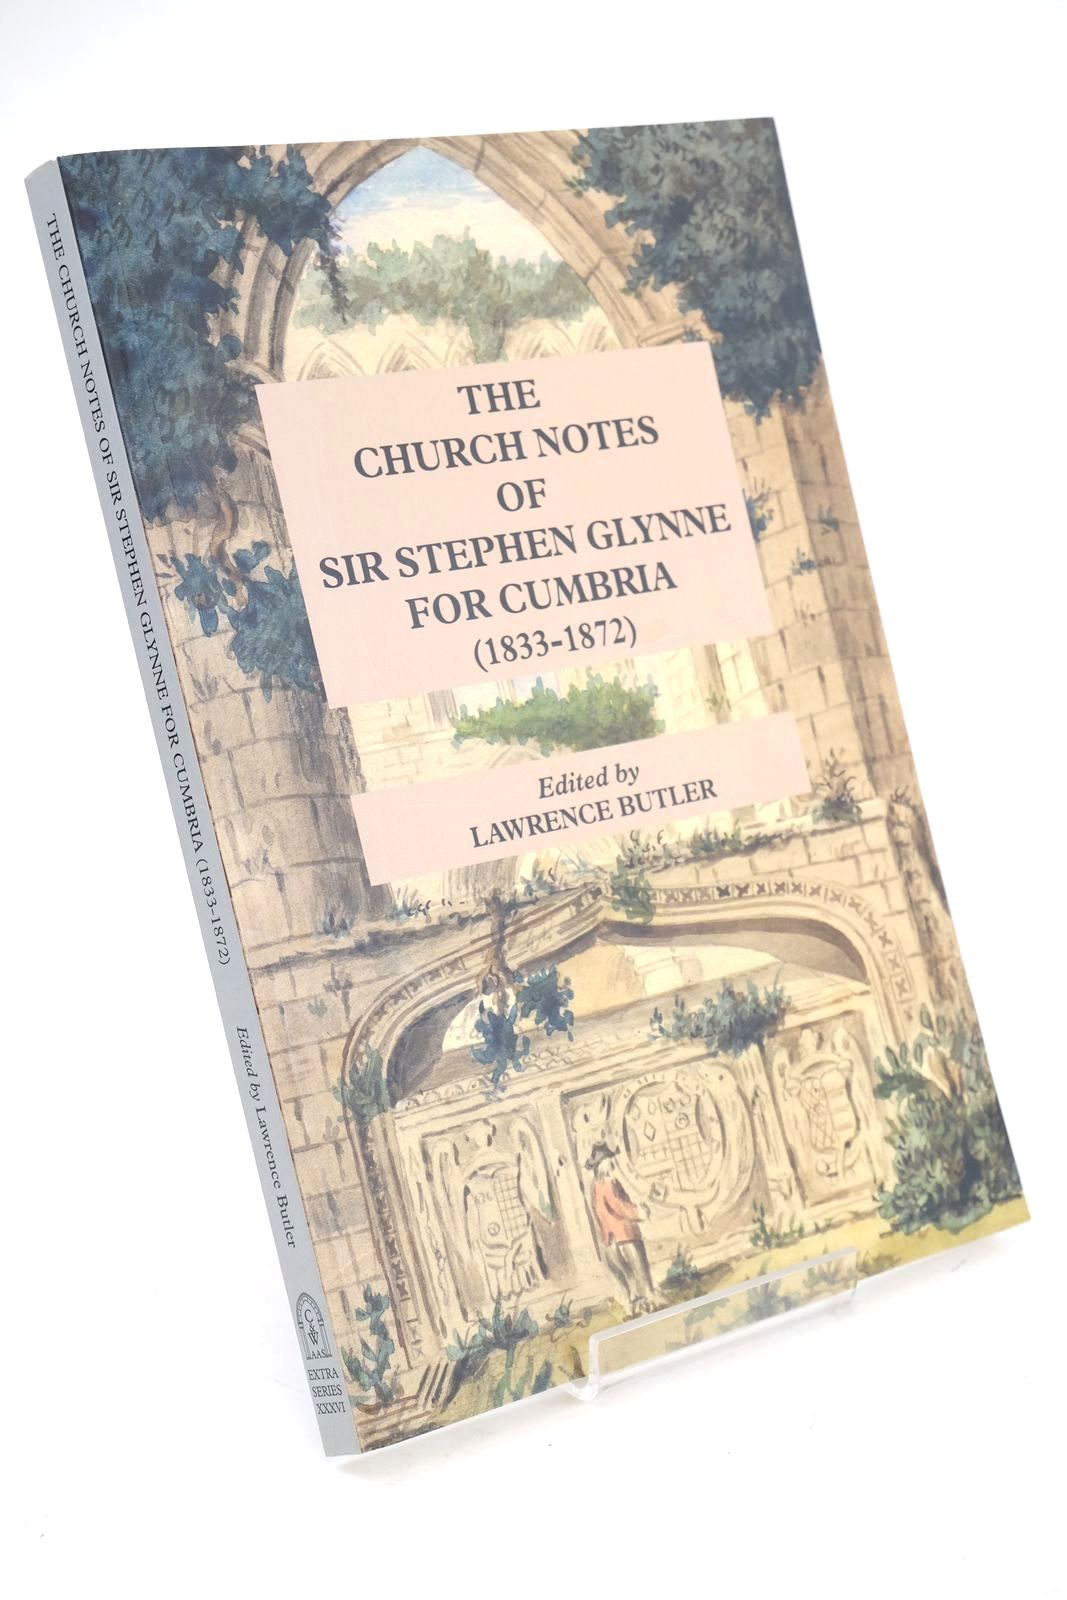 Photo of THE CHURCH NOTES OF SIR STEPHEN GLYNNE FOR CUMBRIA (1833-1872)- Stock Number: 1325297